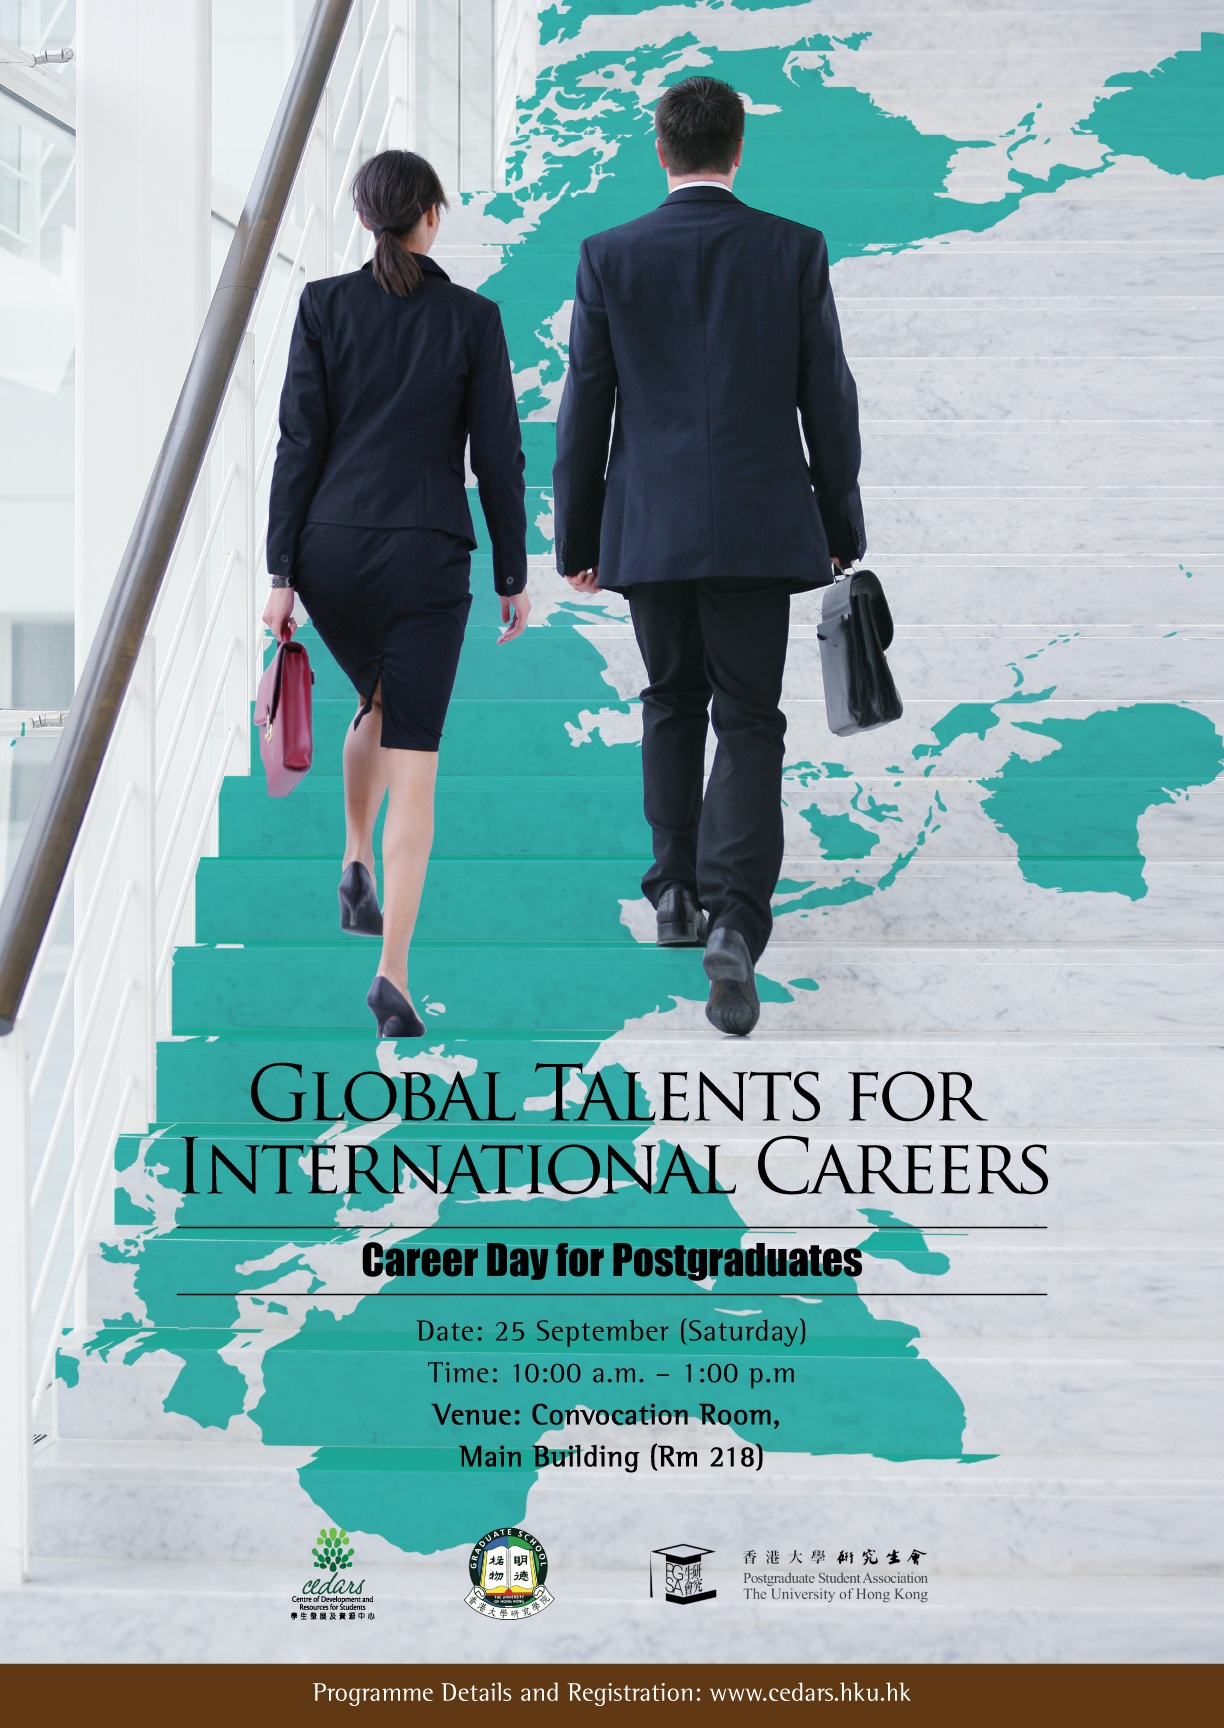 Global Talents for International Careers - Career Day for Postgraduates